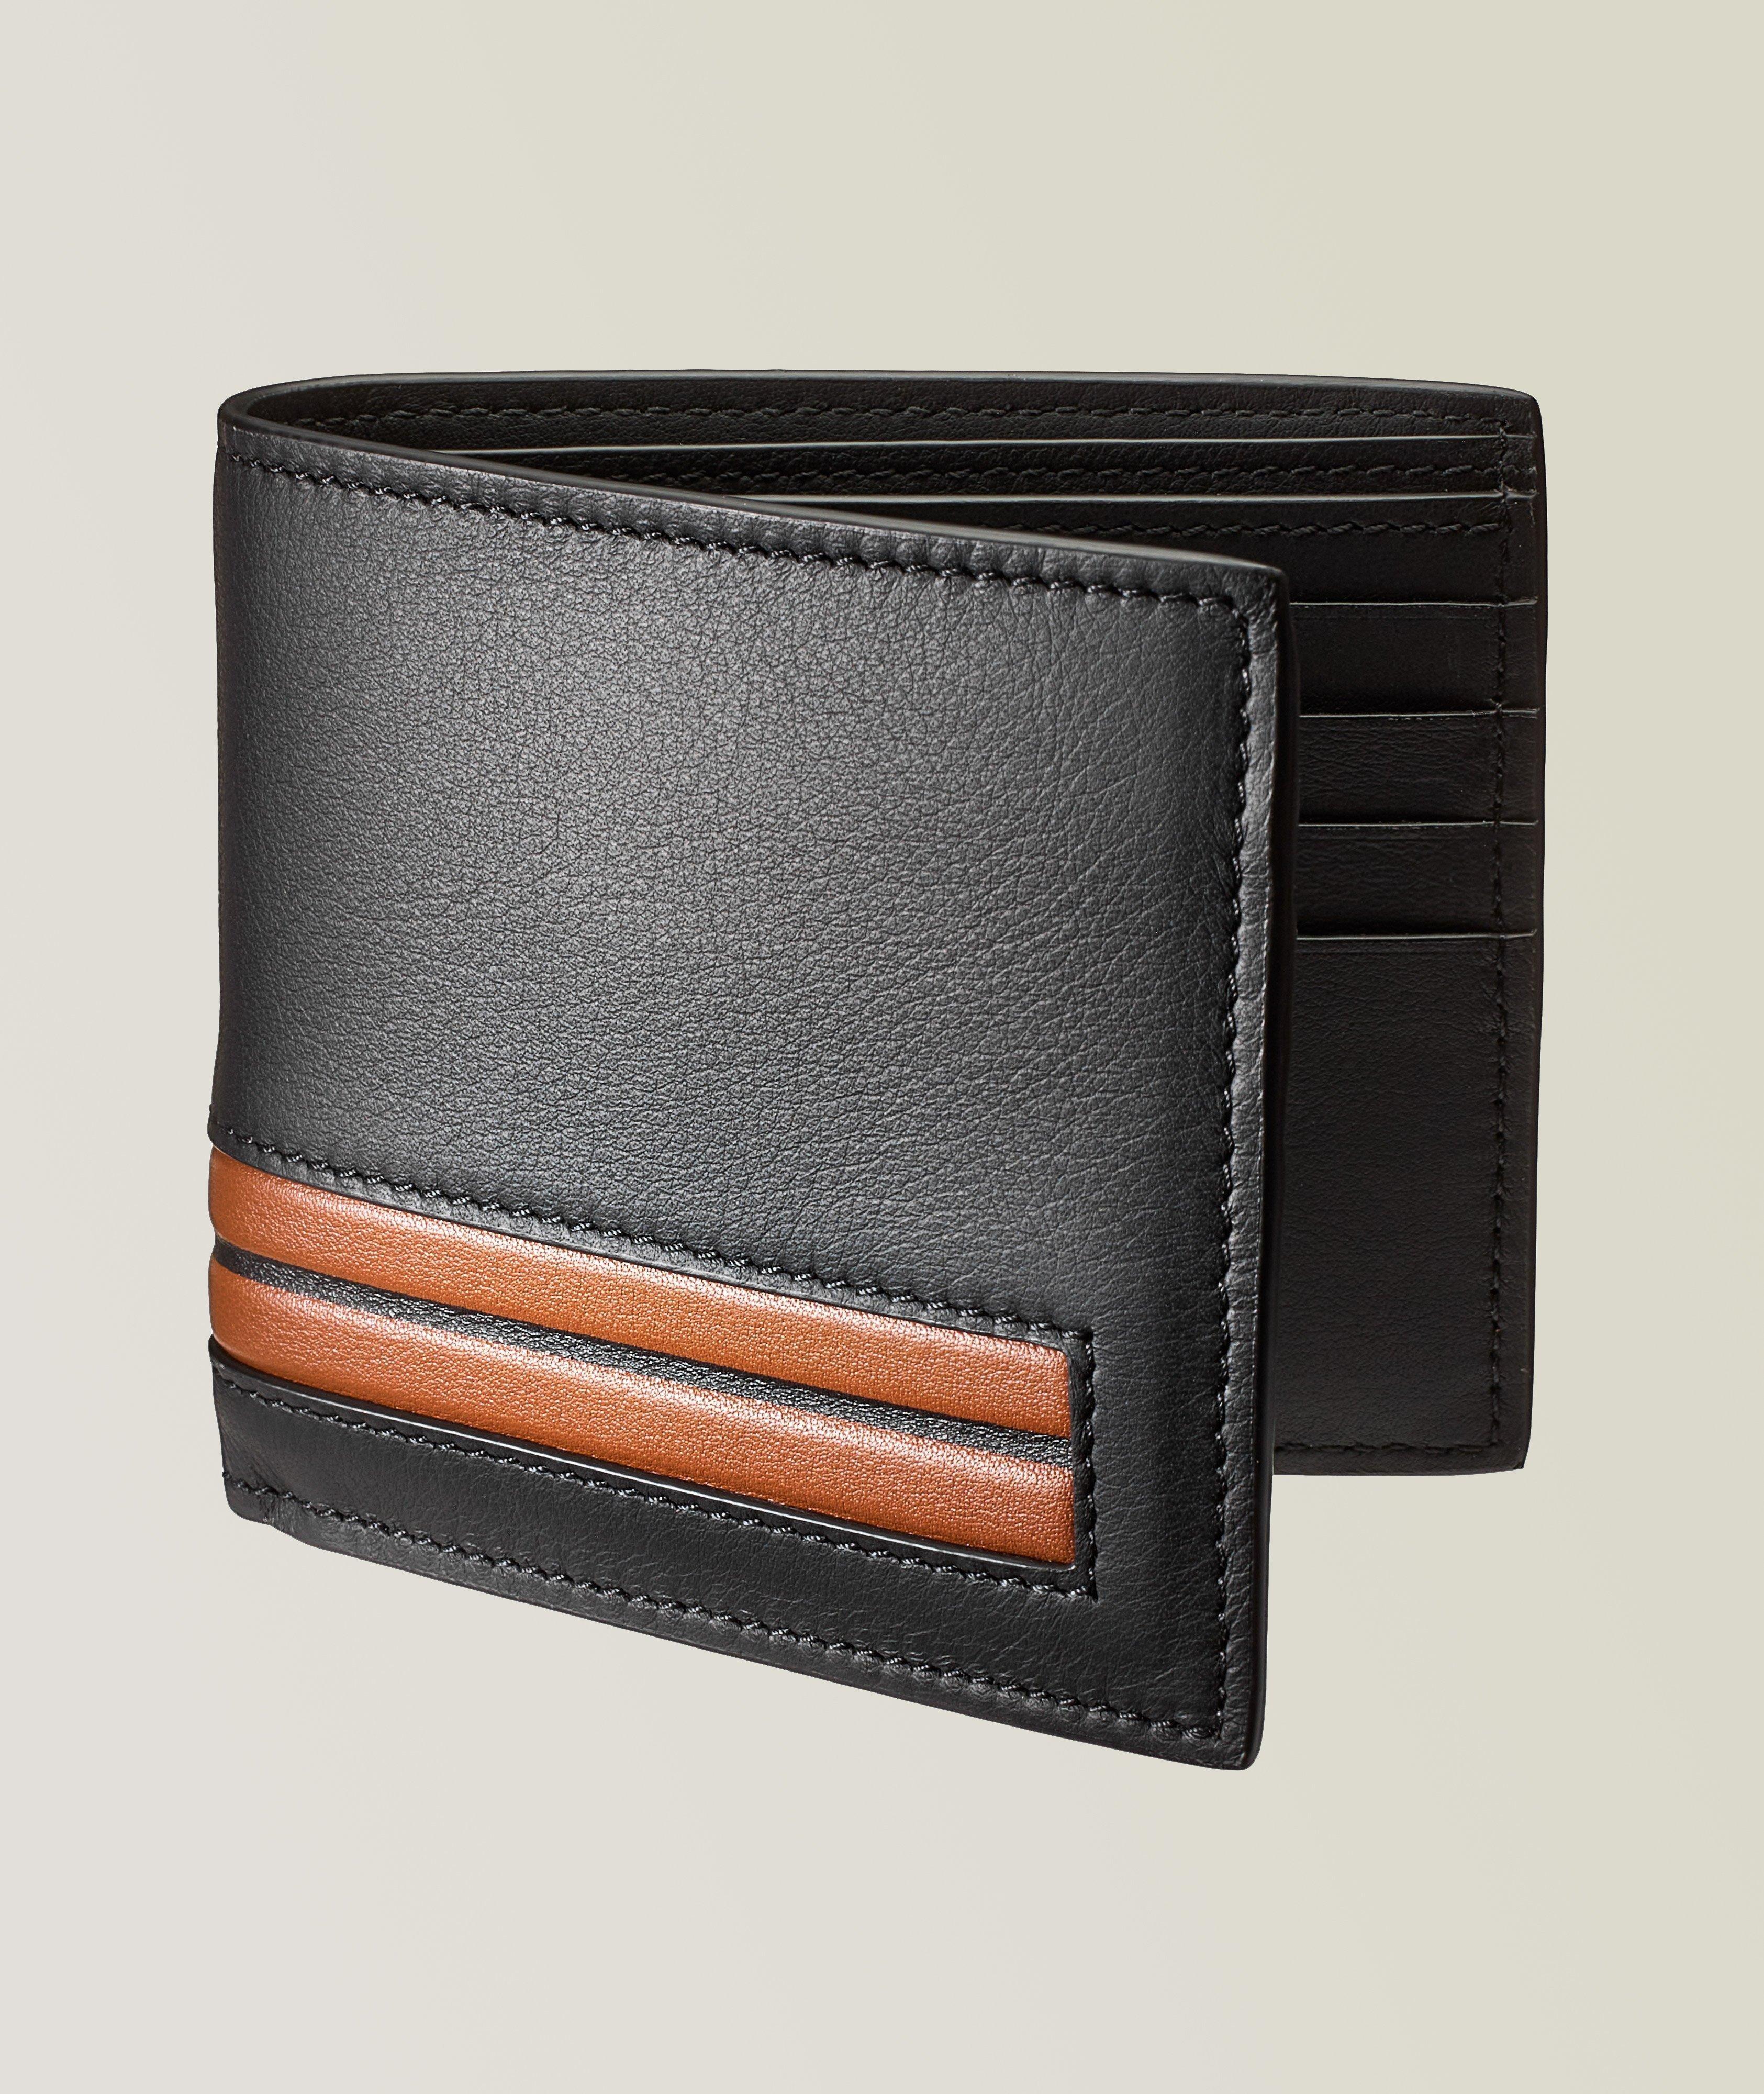 Contrast Band Calfskin Leather Bifold Wallet image 0